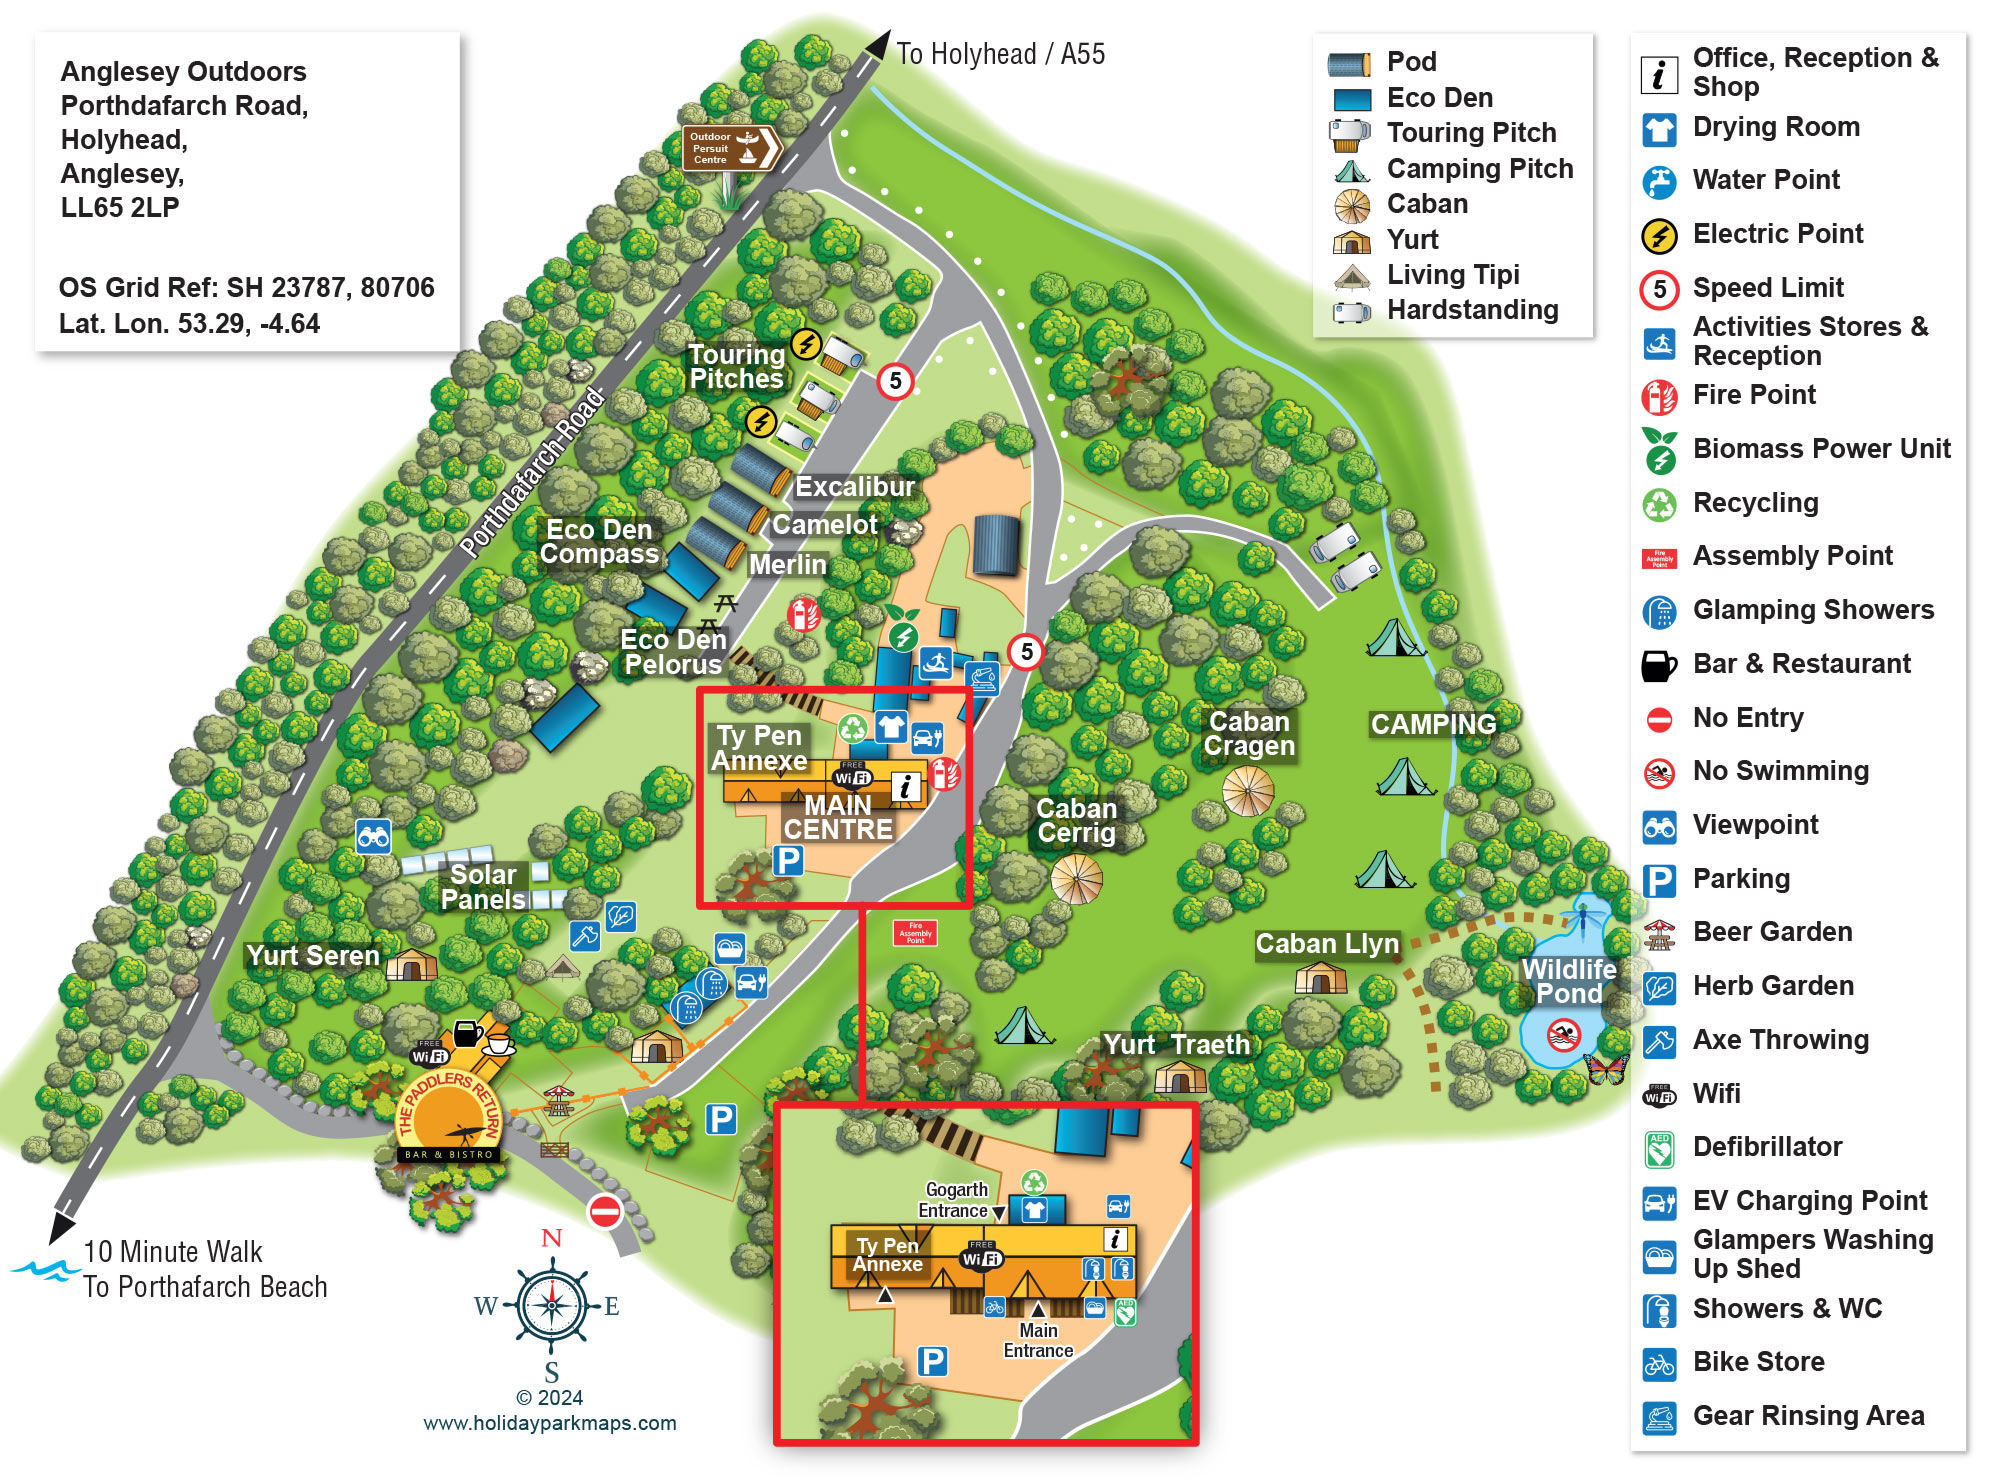 Anglesey Outdoors Site Map